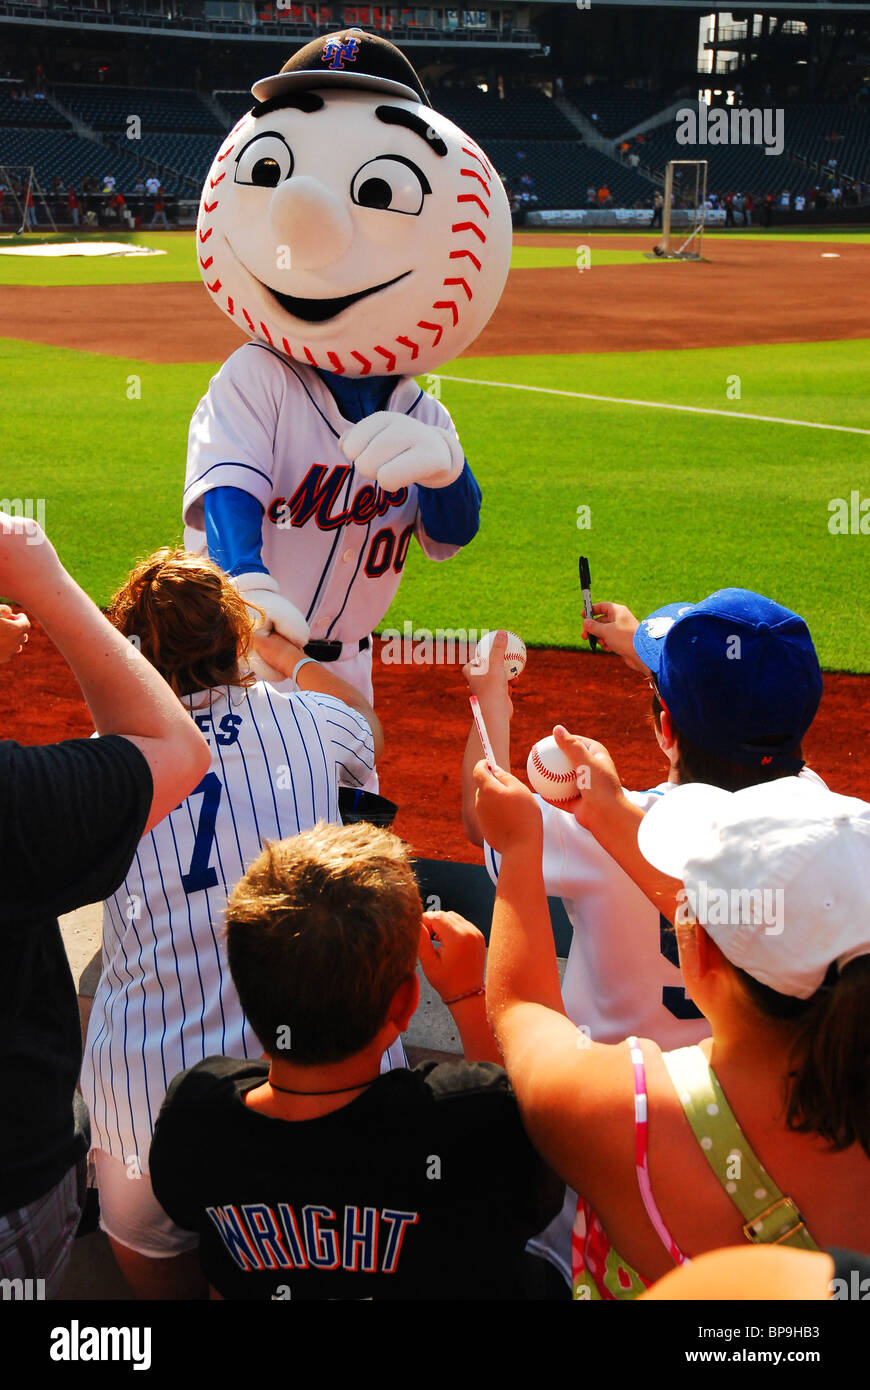 Mr Met greets the fans at Citi Field. Stock Photo